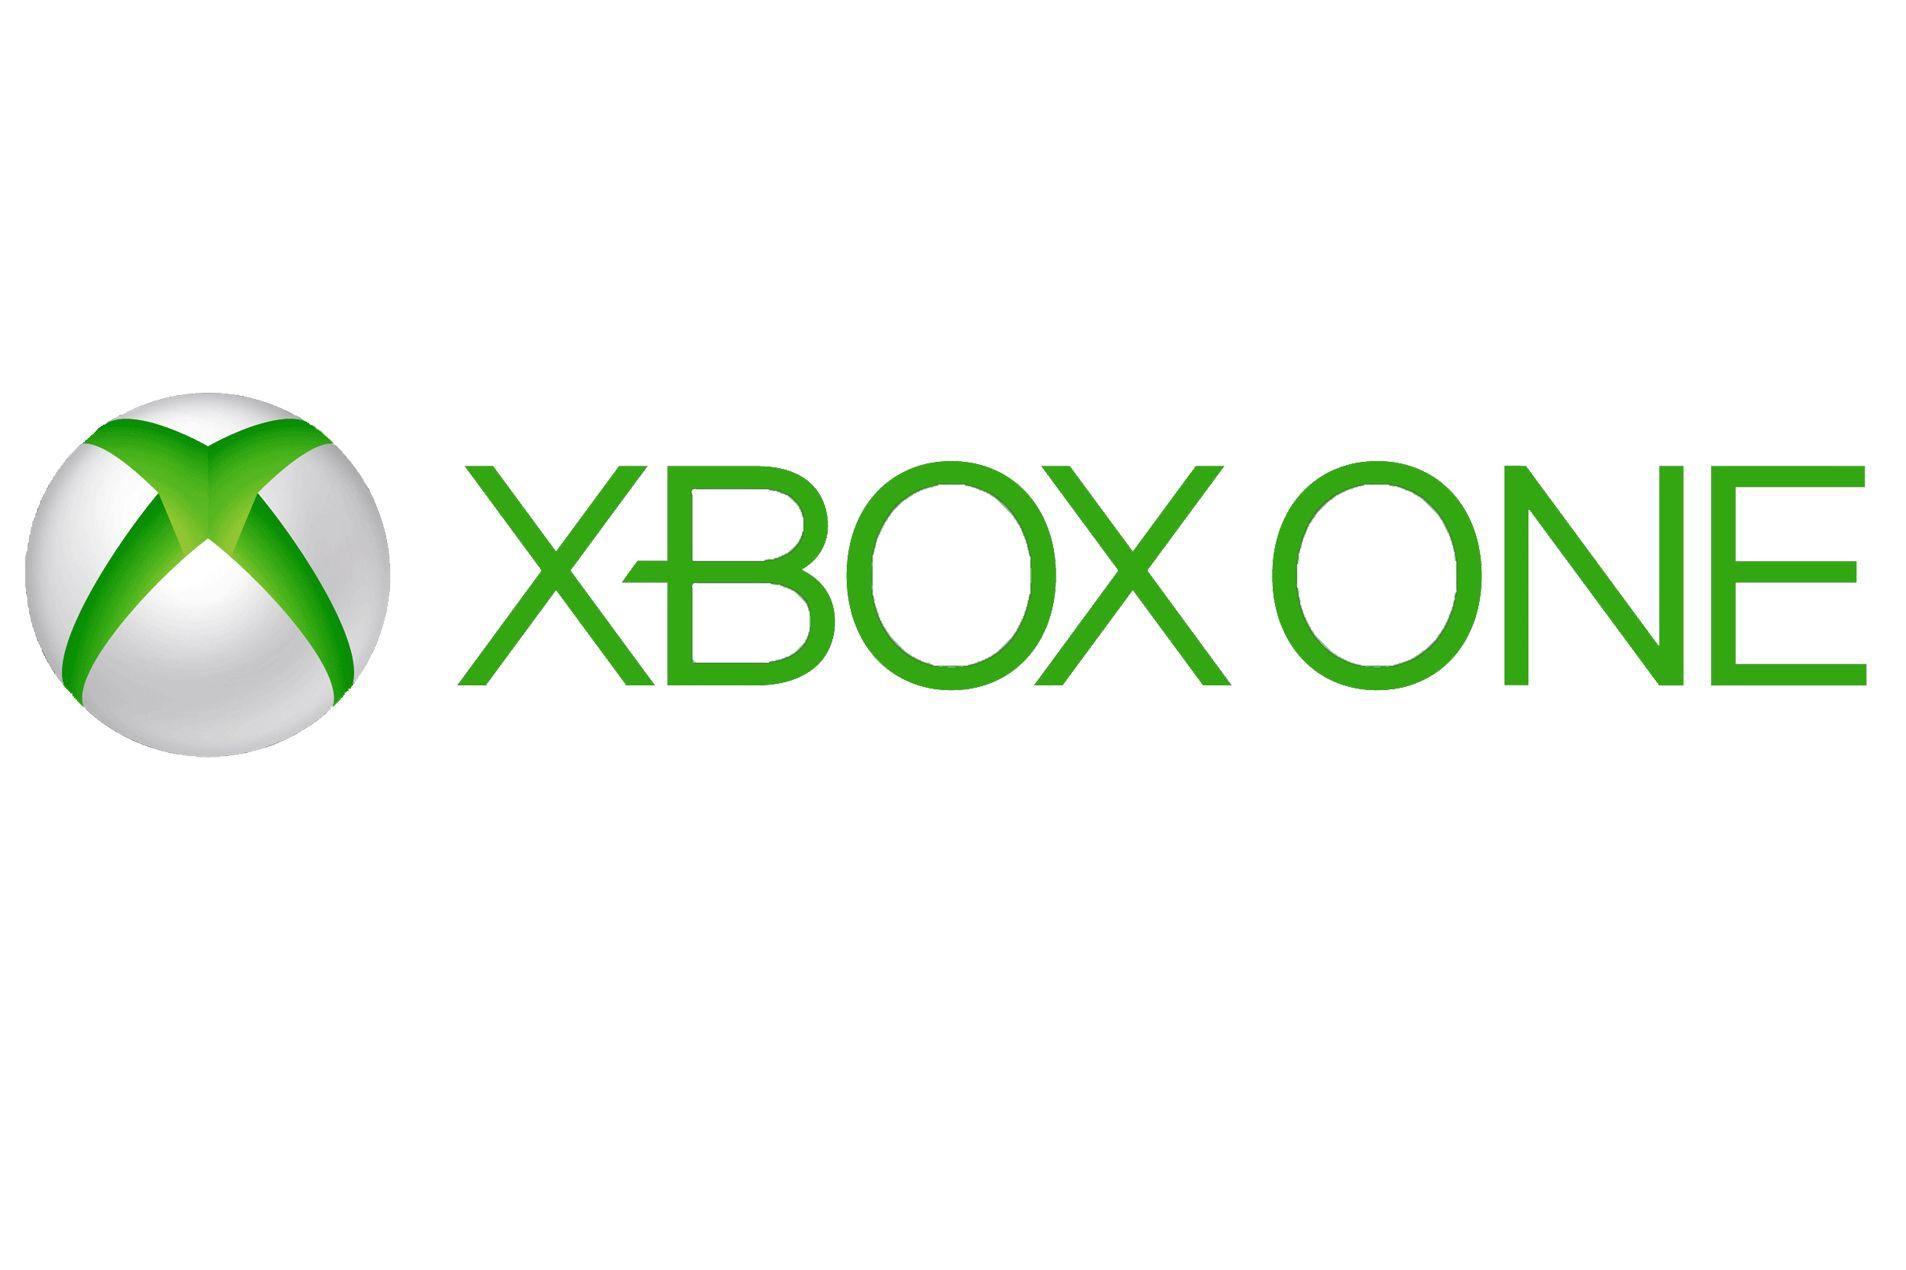 New Xbox 360 Logo - Xbox One users will have to pay for Skype | Cloud Pro